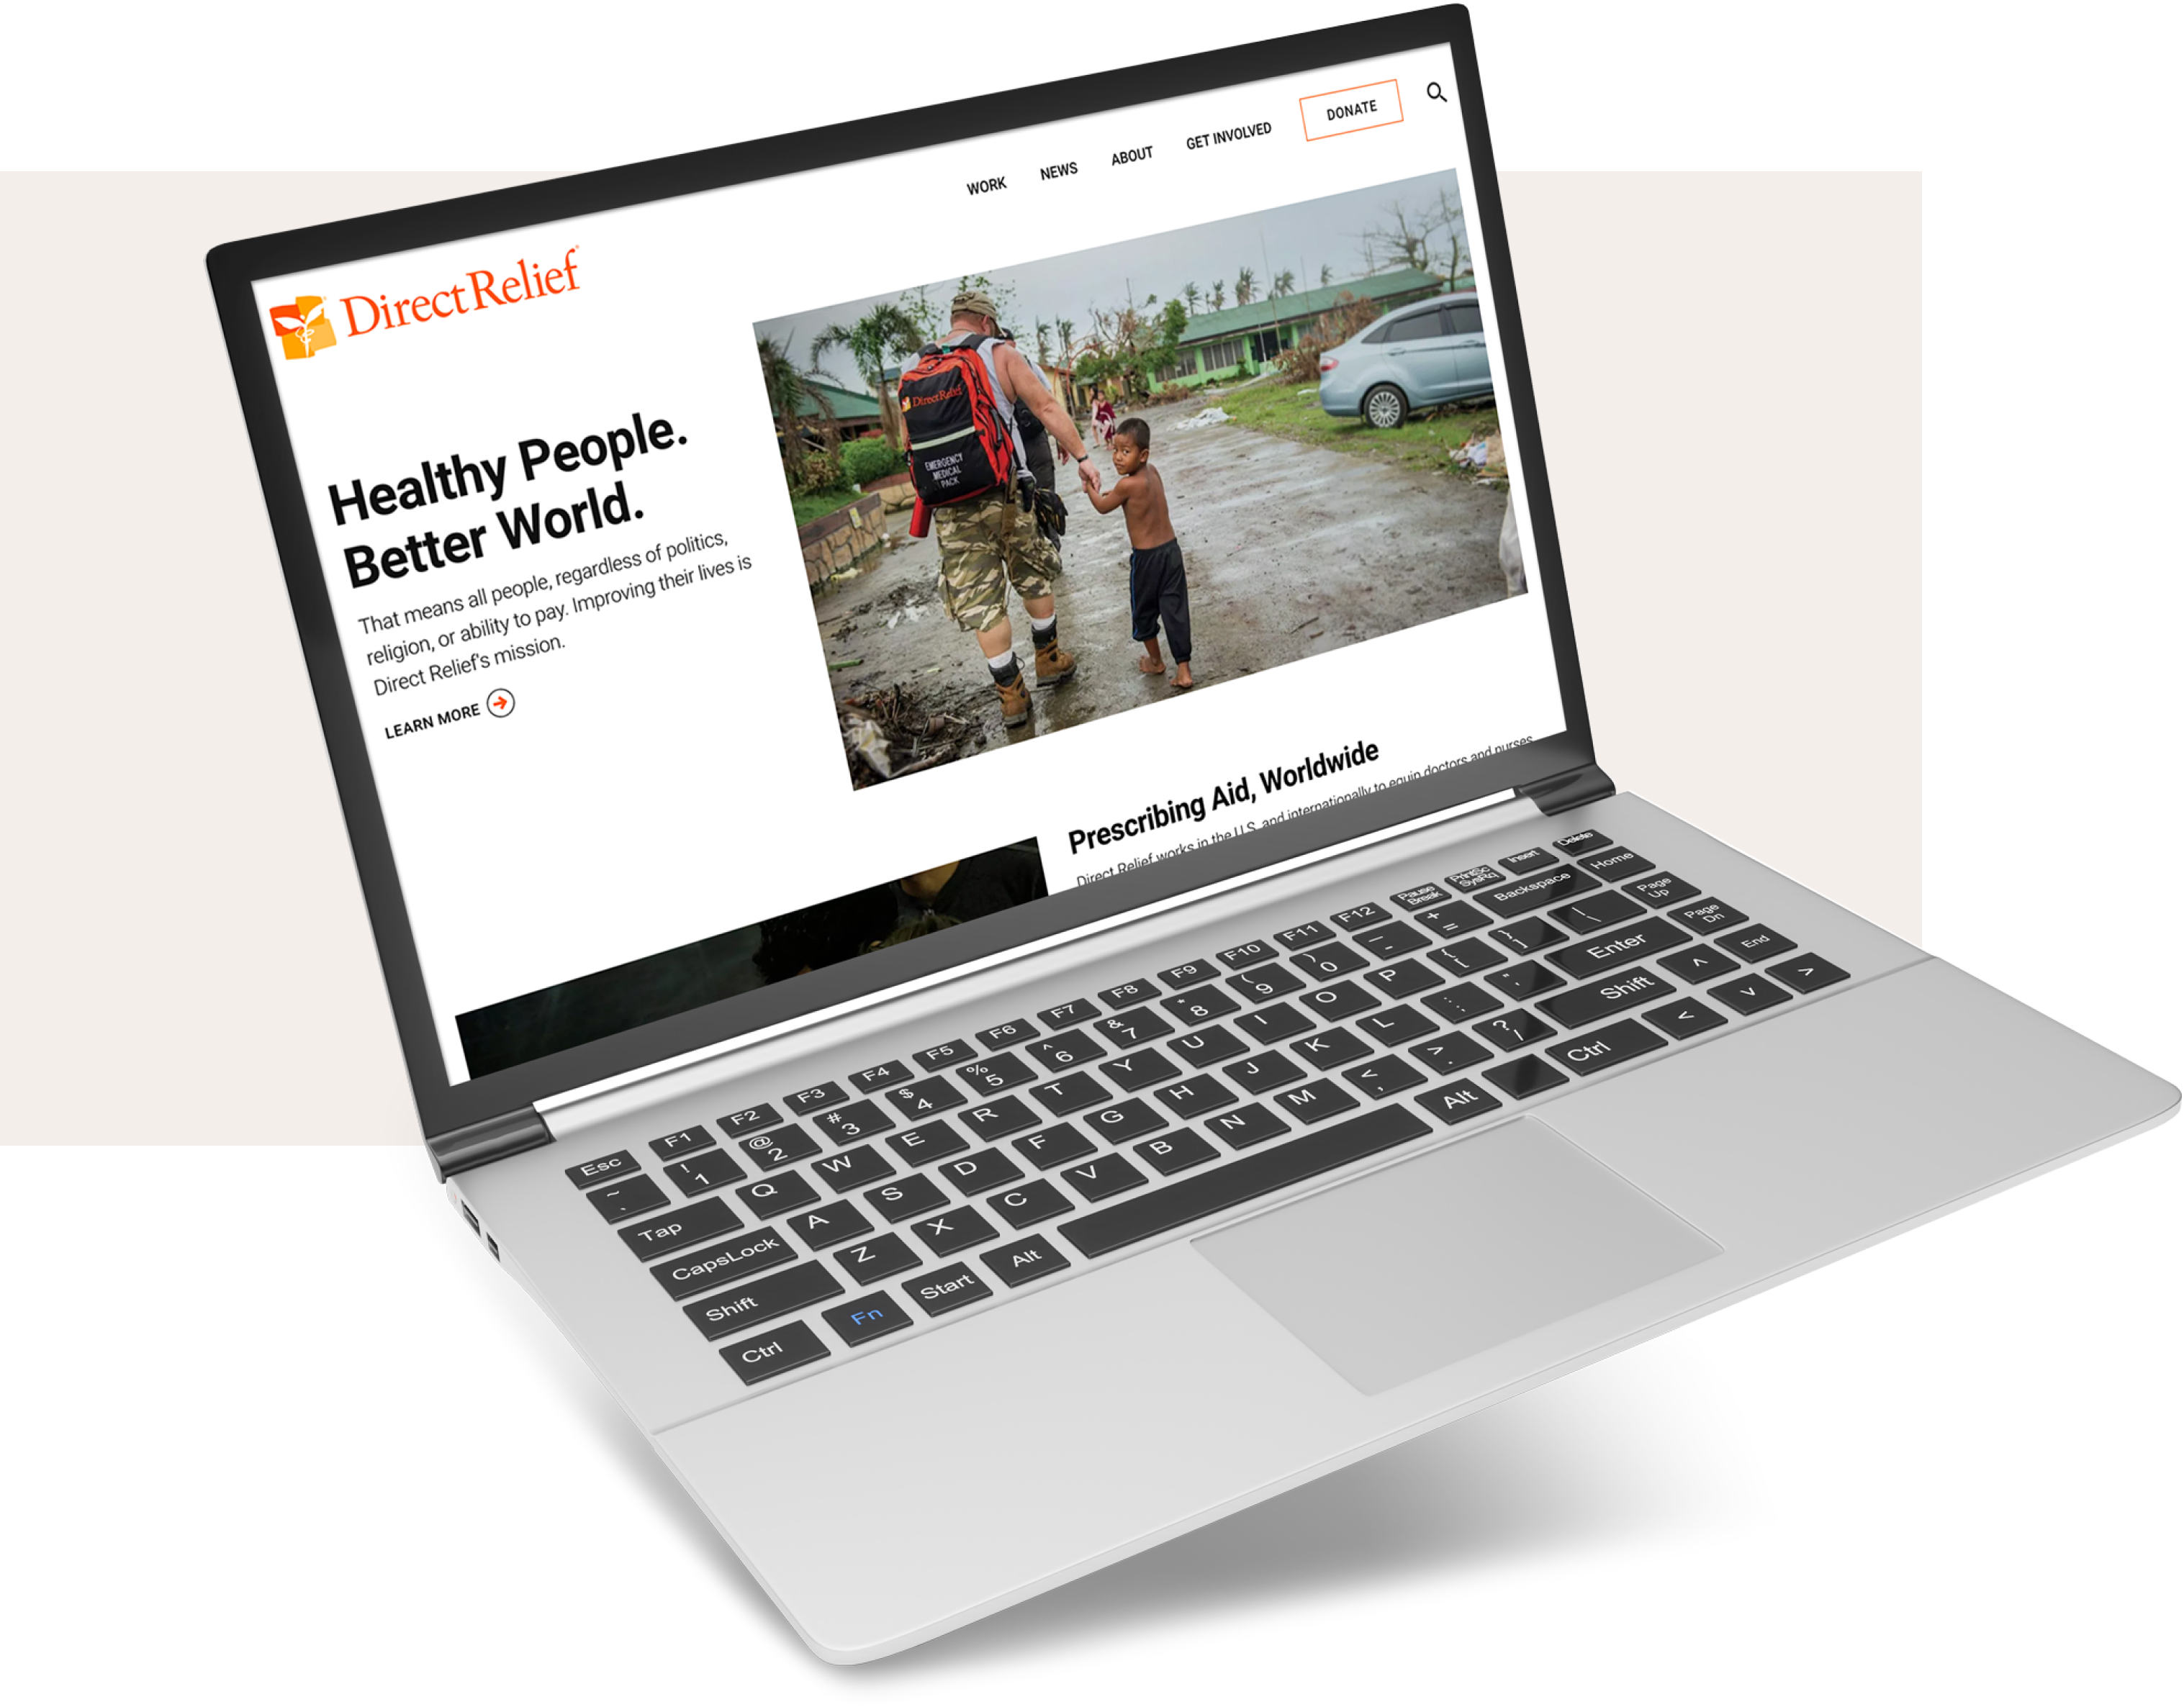 The Direct Relief homepage with a headline and image, displayed on a laptop screen